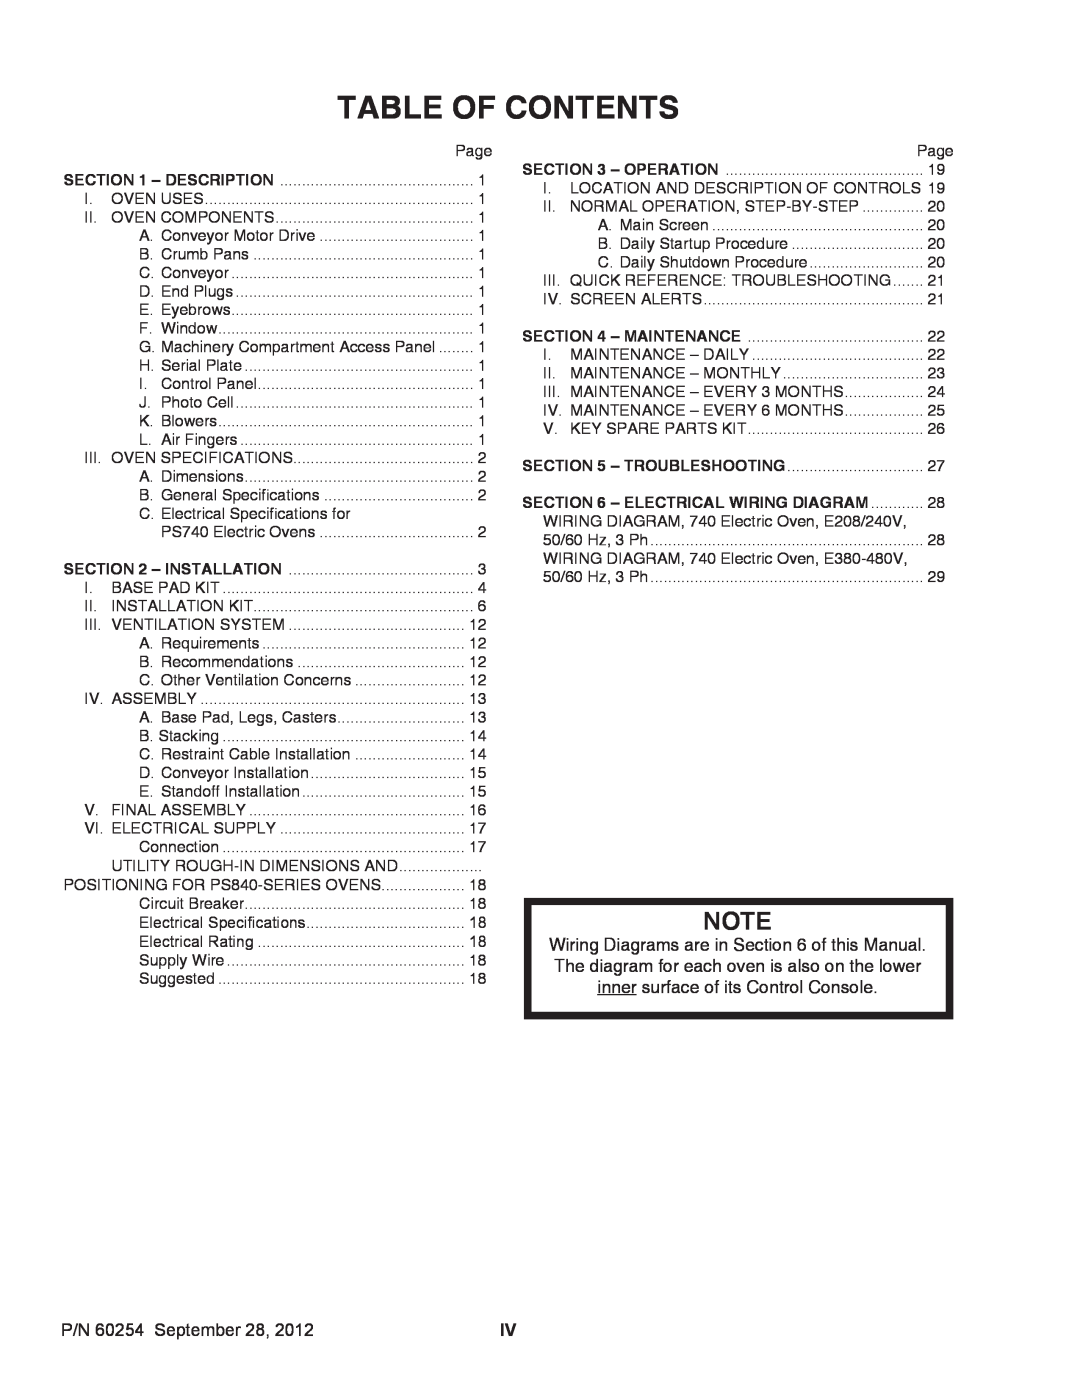 Middleby Marshall installation manual Table Of Contents, P/N 60254 September 28, Operation, Electrical Wiring Diagram 